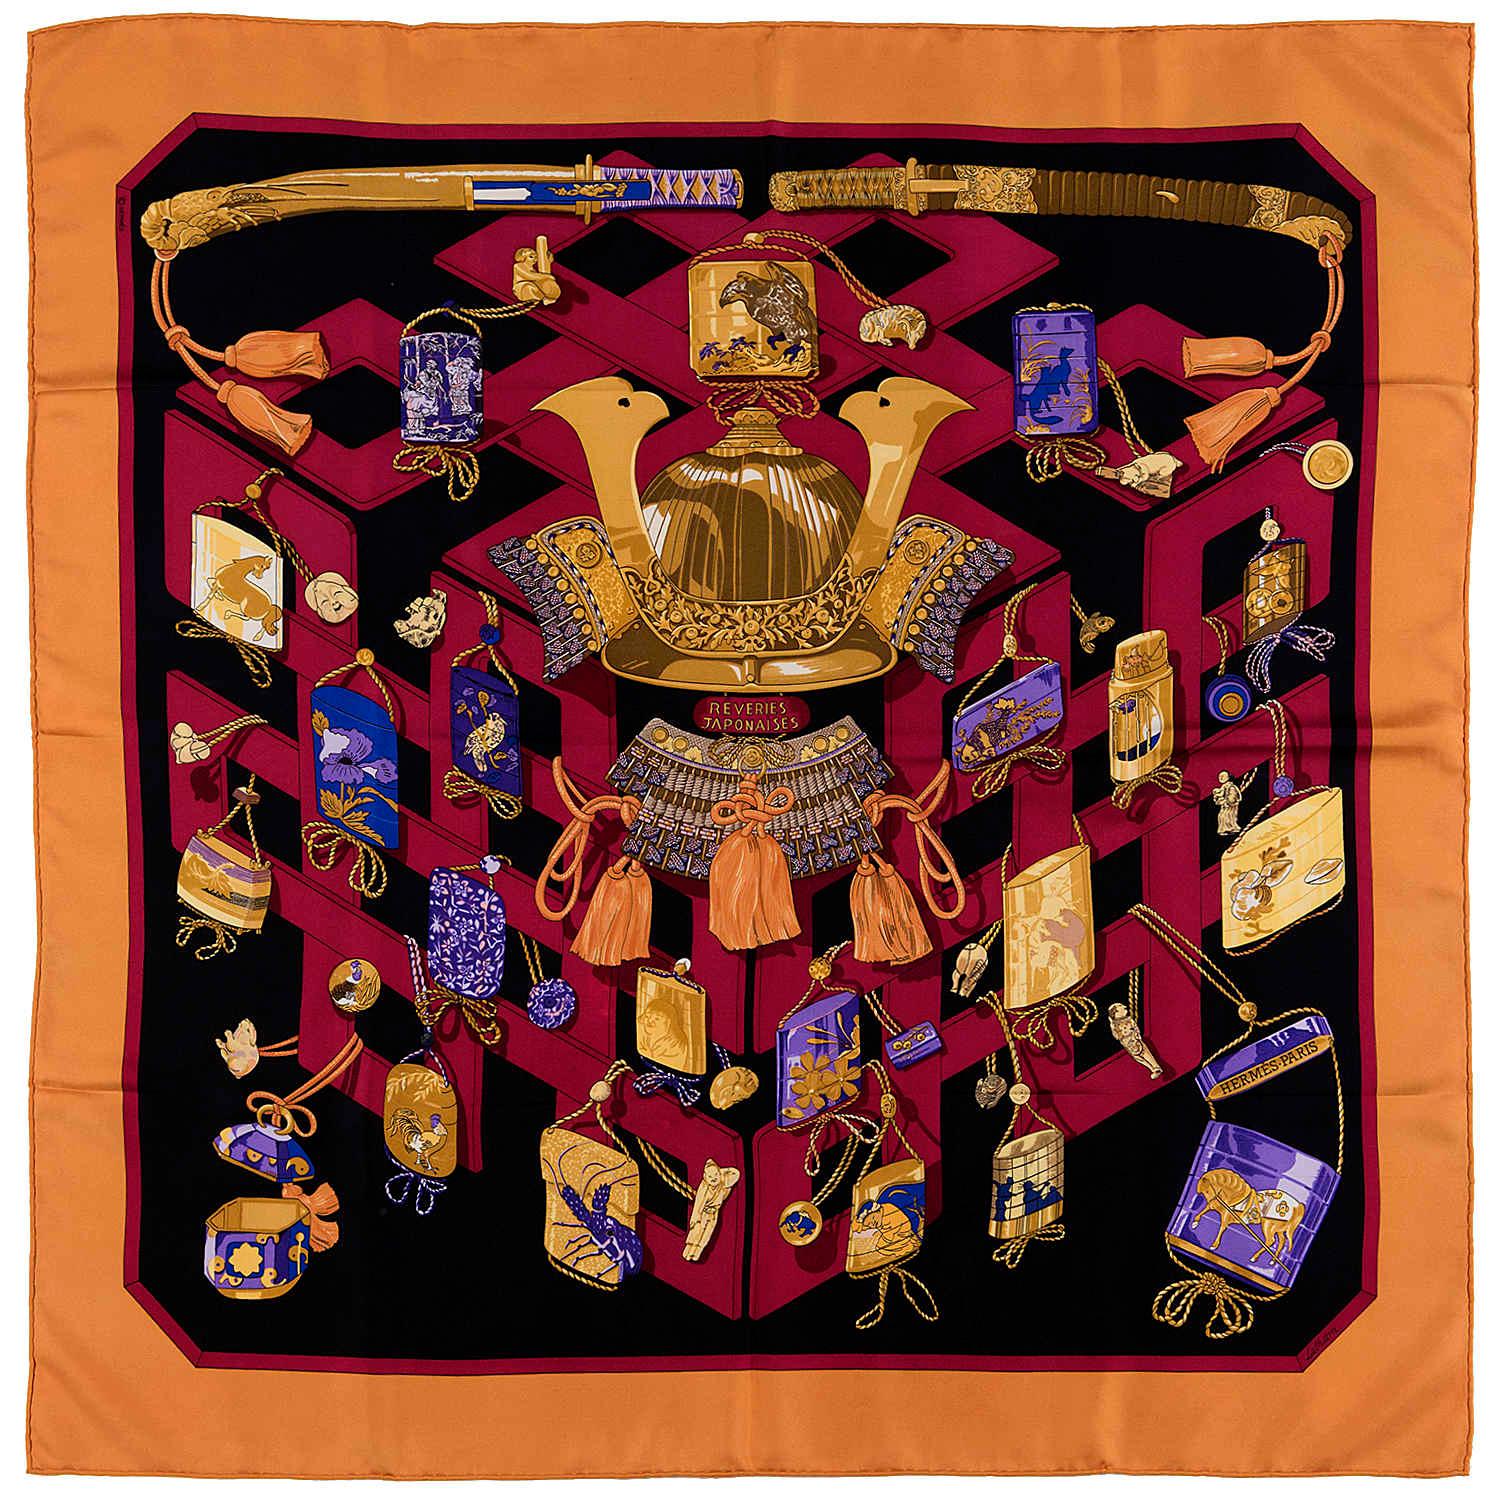 Brown Very Rare Vintage Hermes Silk Scarf 'Reveries Japonaises' by Caty Latham For Sale